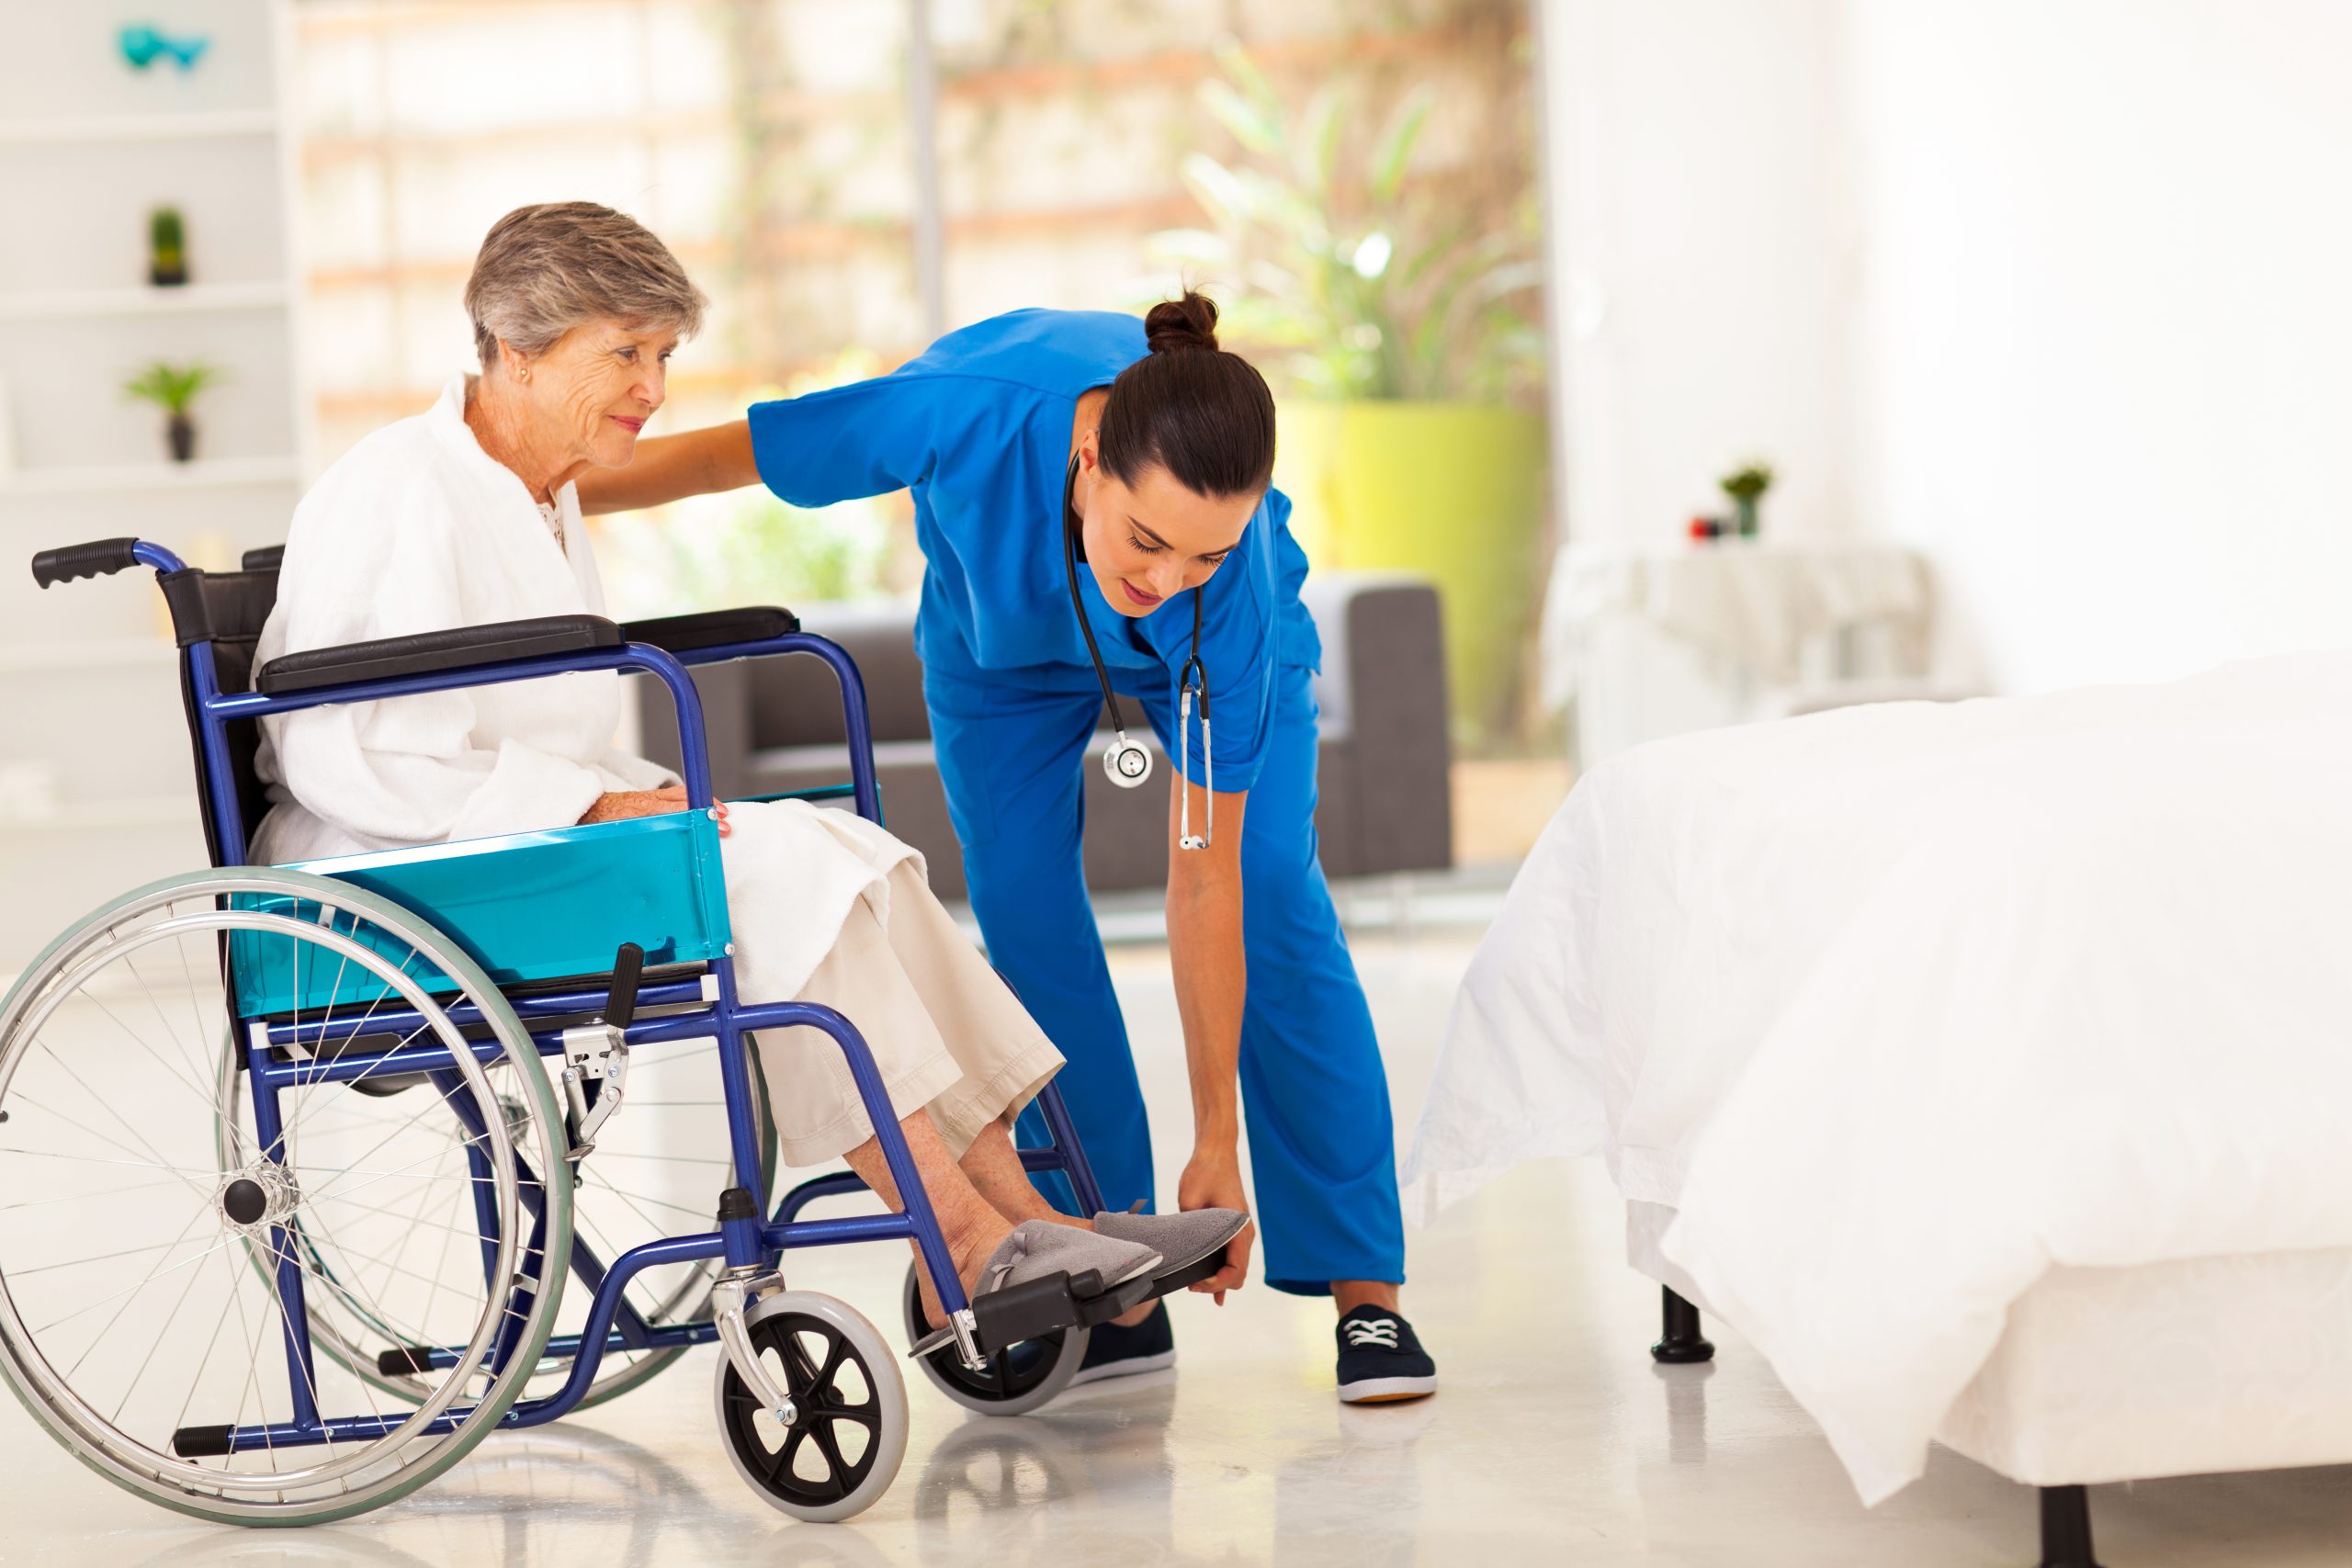 Essential Role of Caregivers